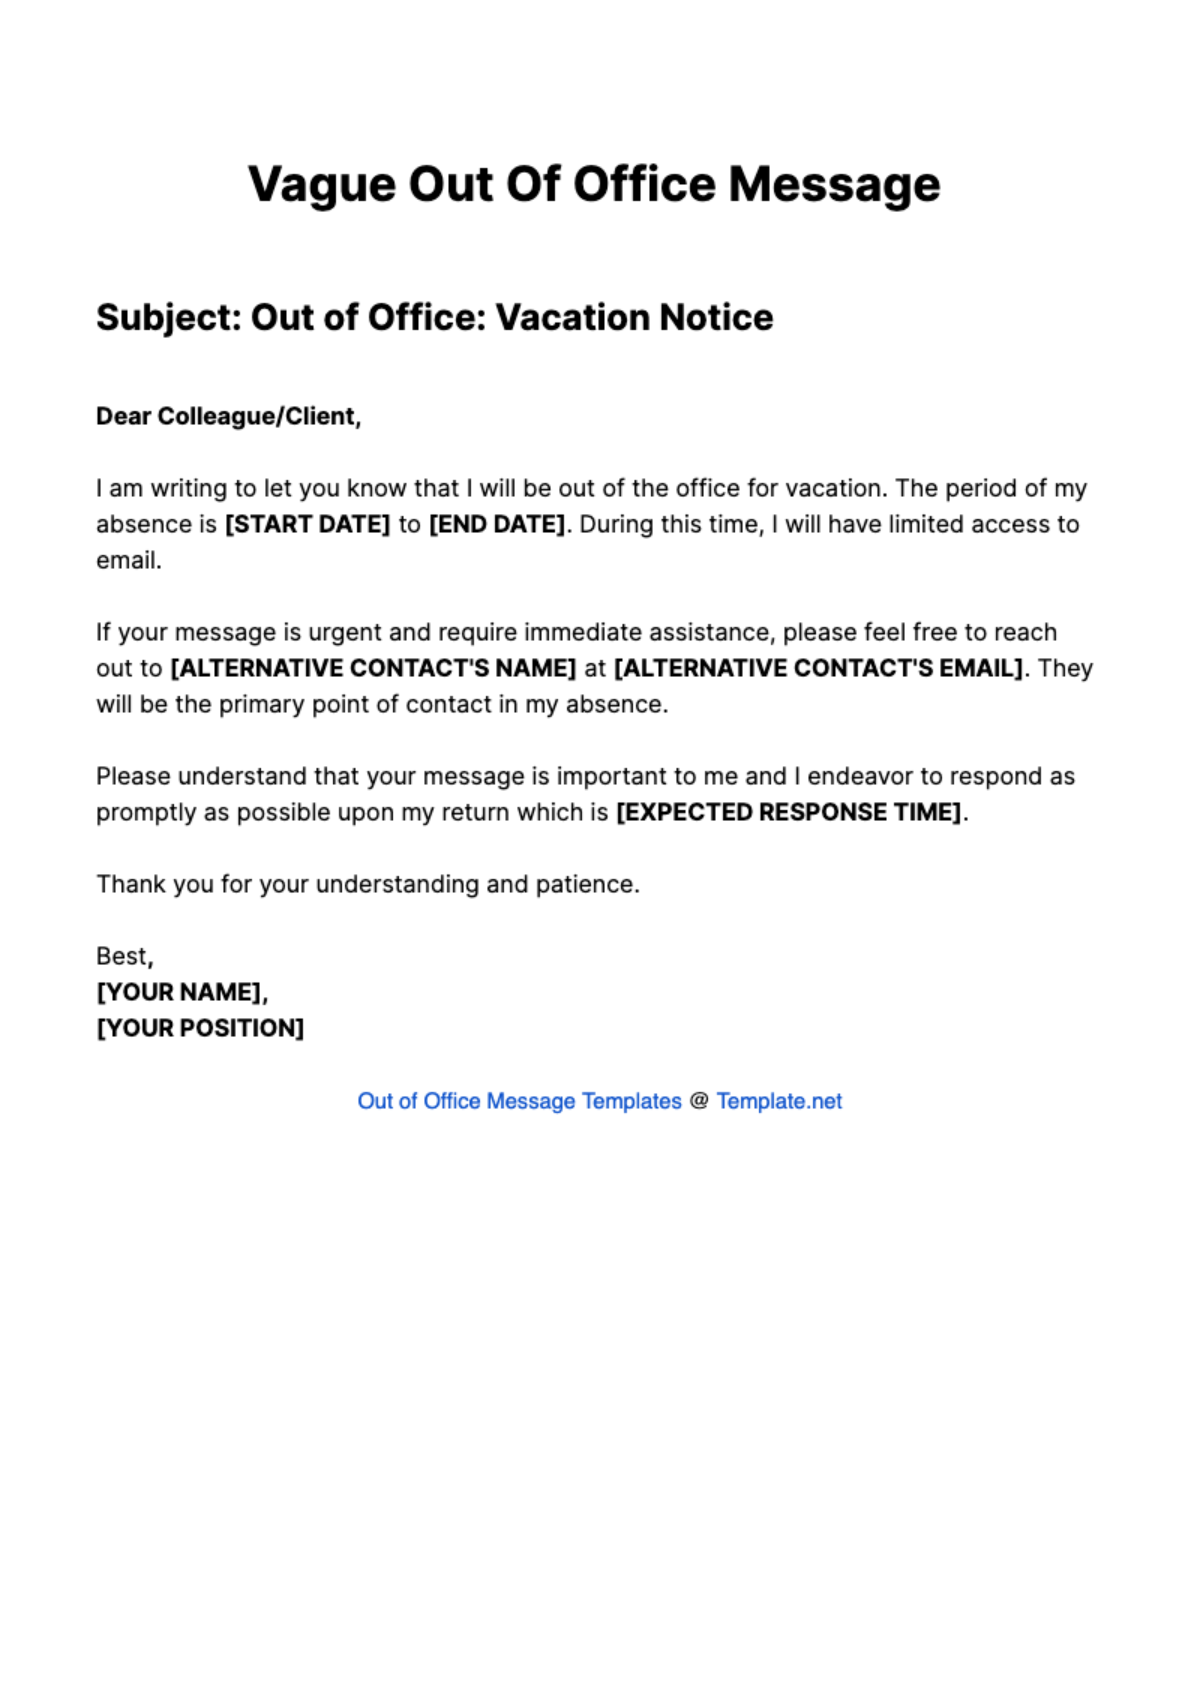 Vague Out Of Office Message Template